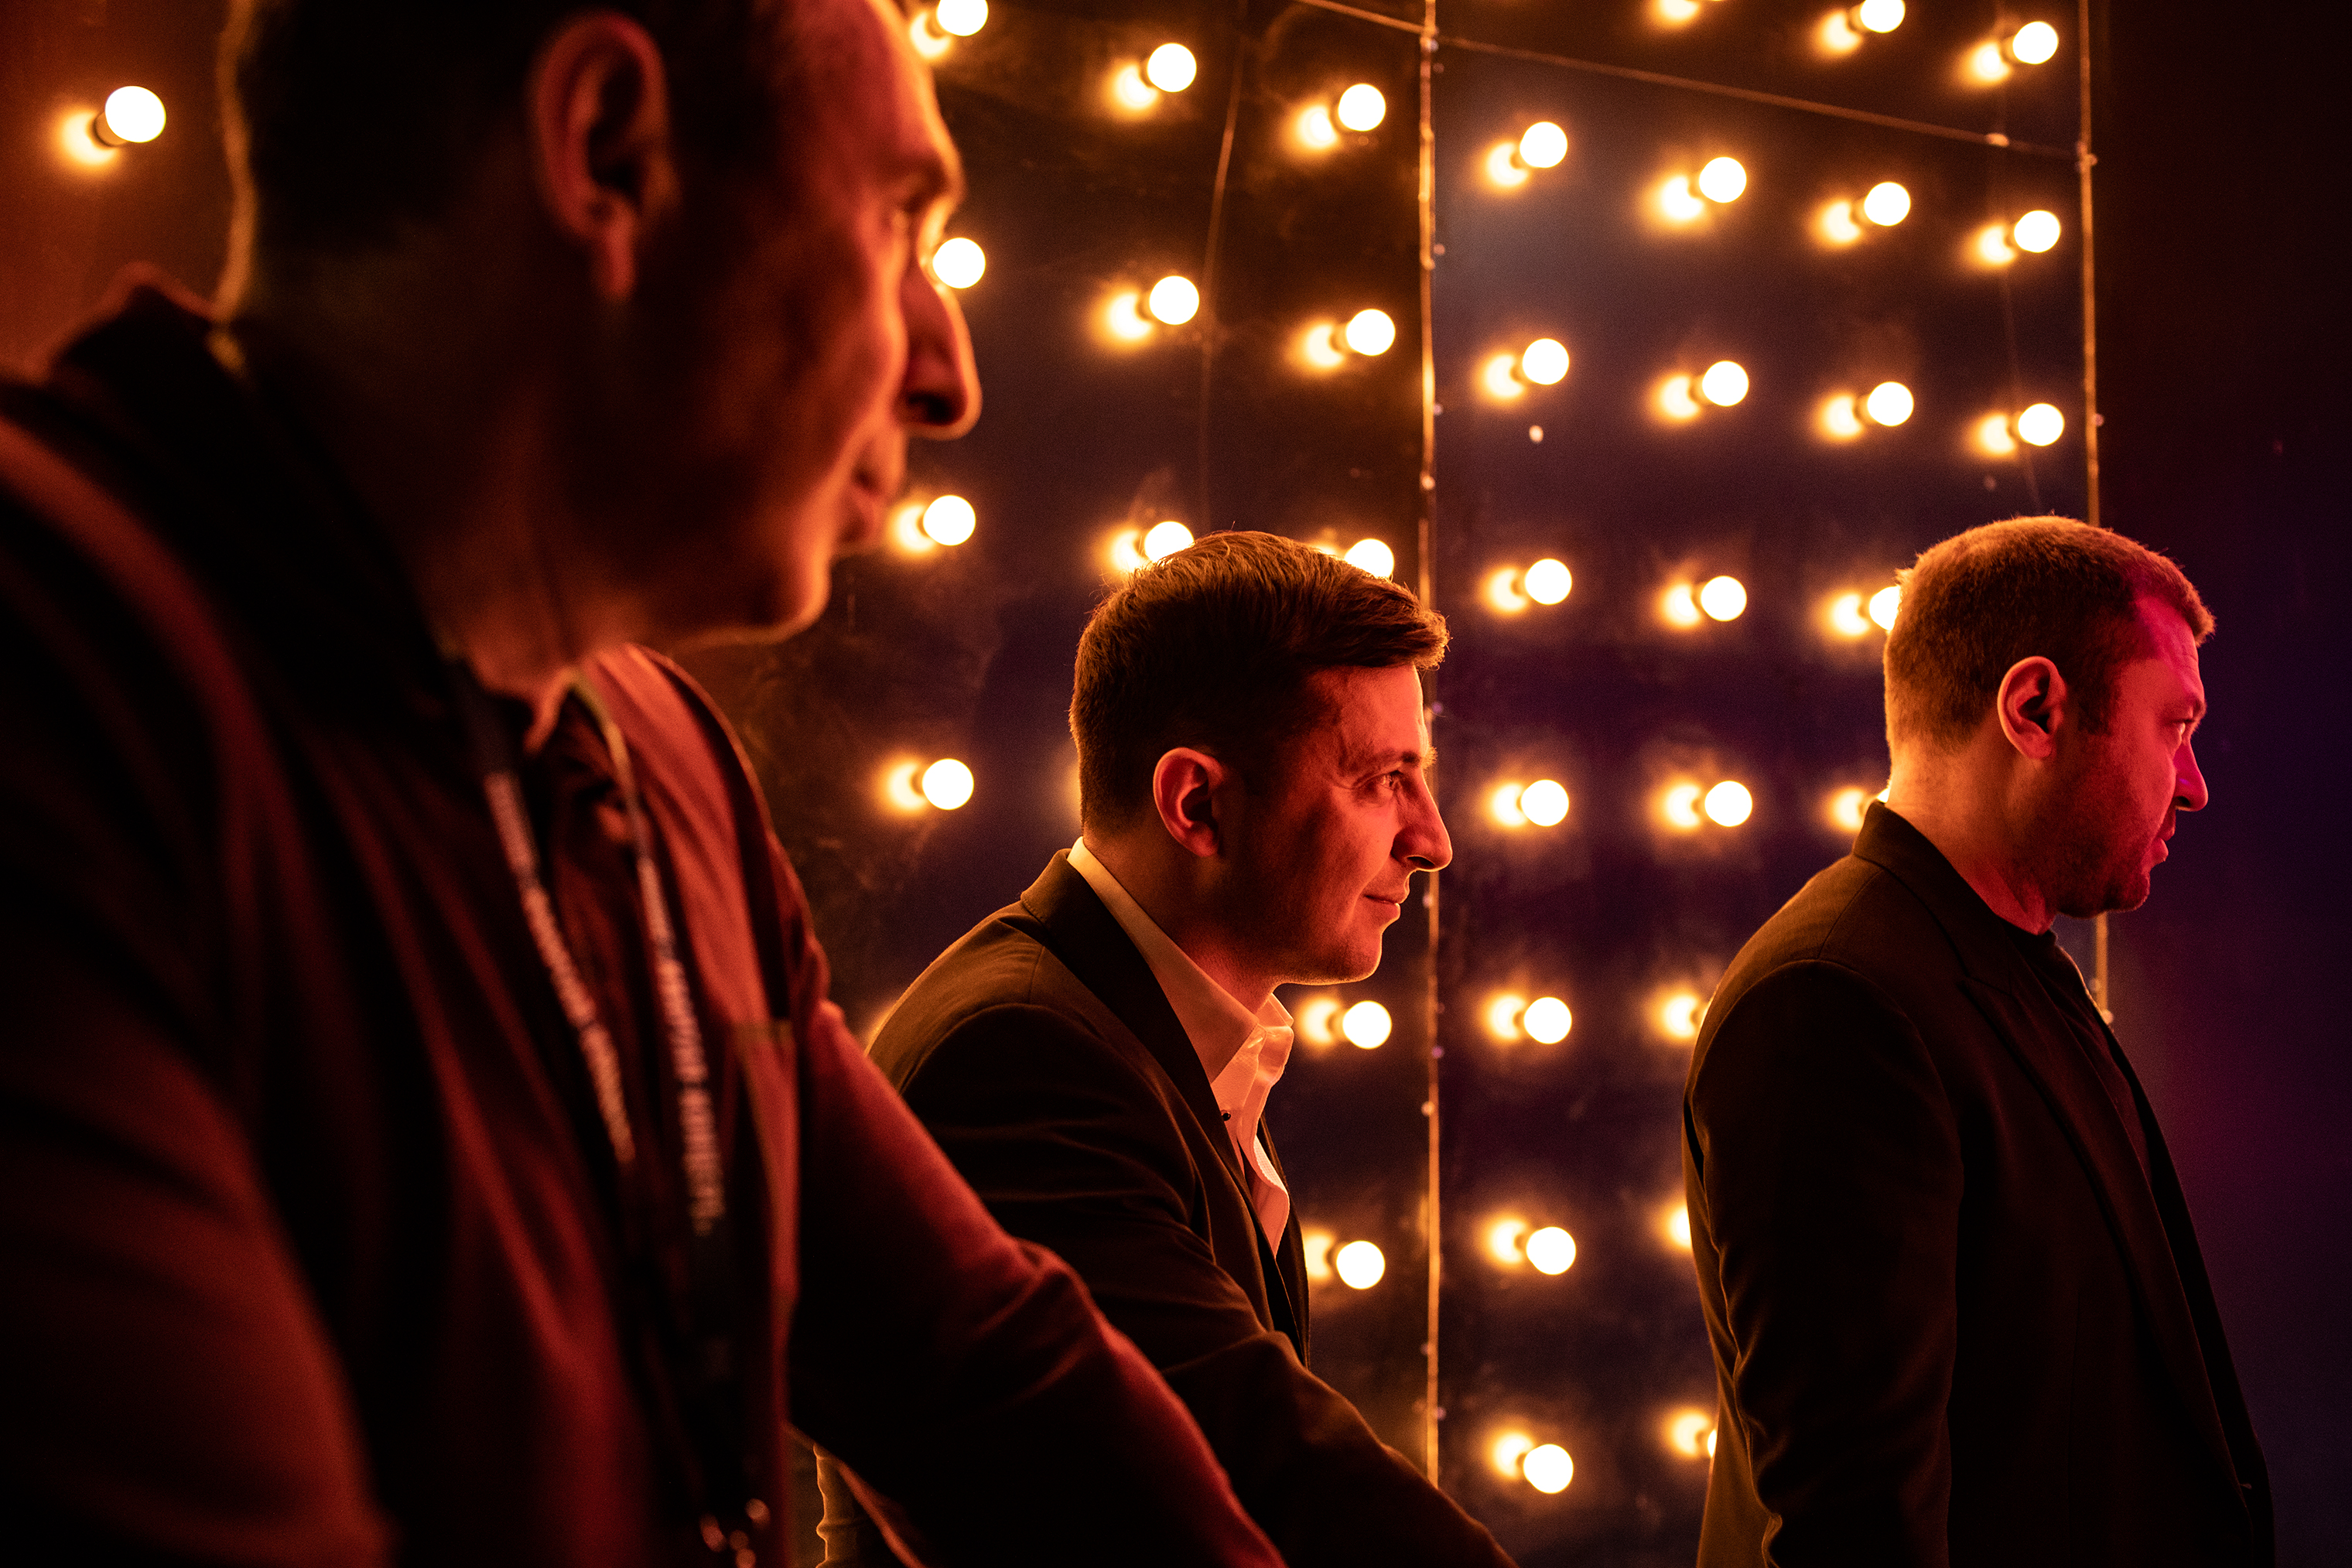 Volodymyr Zelensky, center, watches from the wings as his colleagues perform during a televised comedy sketch show in Kiev on March 13. Zelensky was later elected to the presidency. (Anastasia Taylor-Lind for TIME)